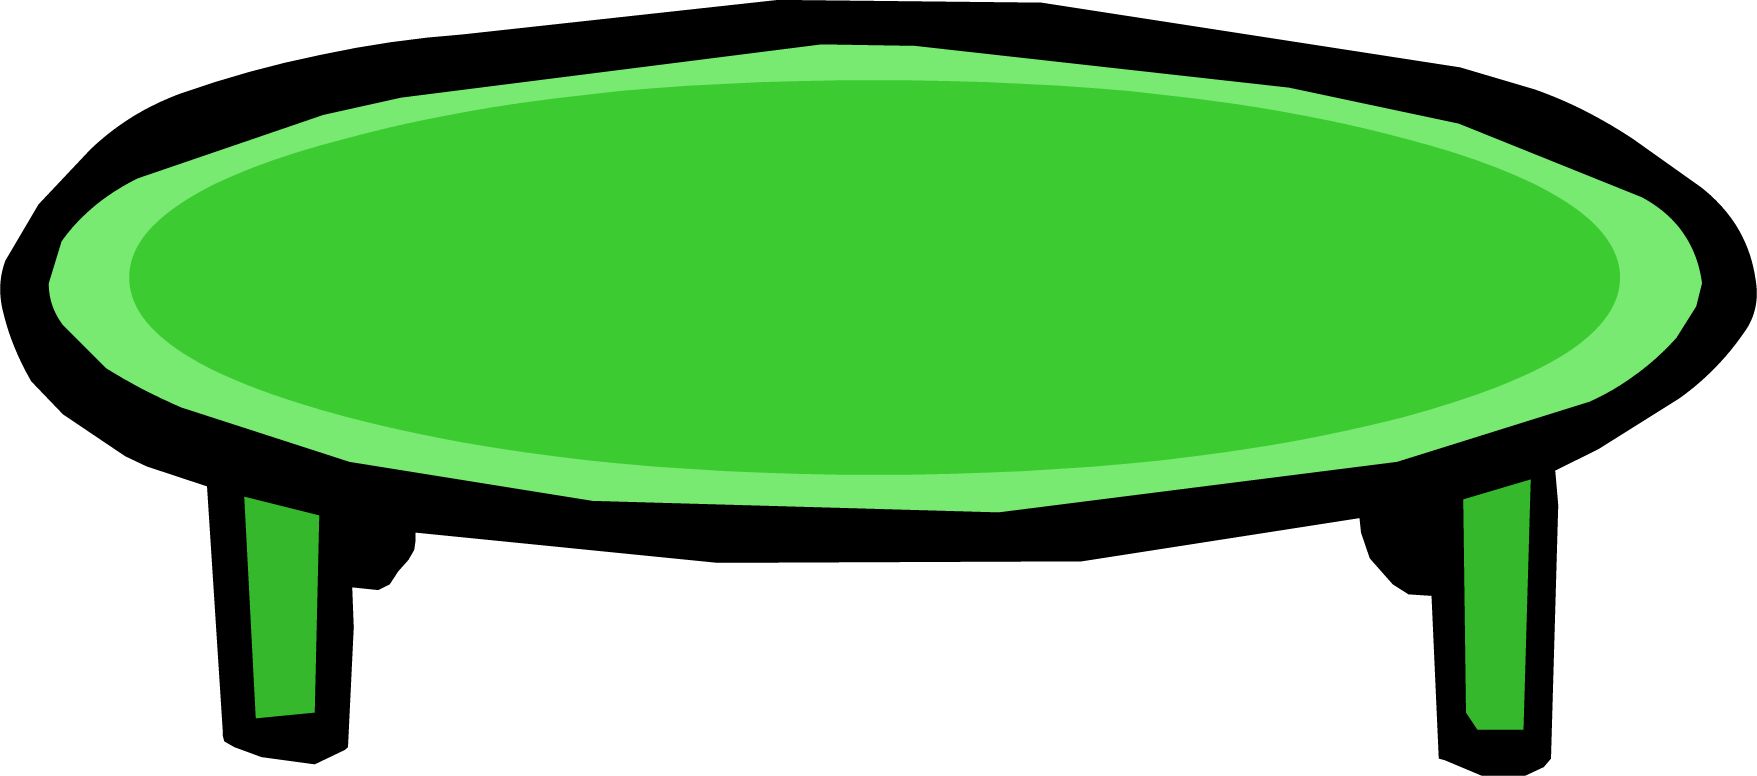 A Green Oval With Black Background